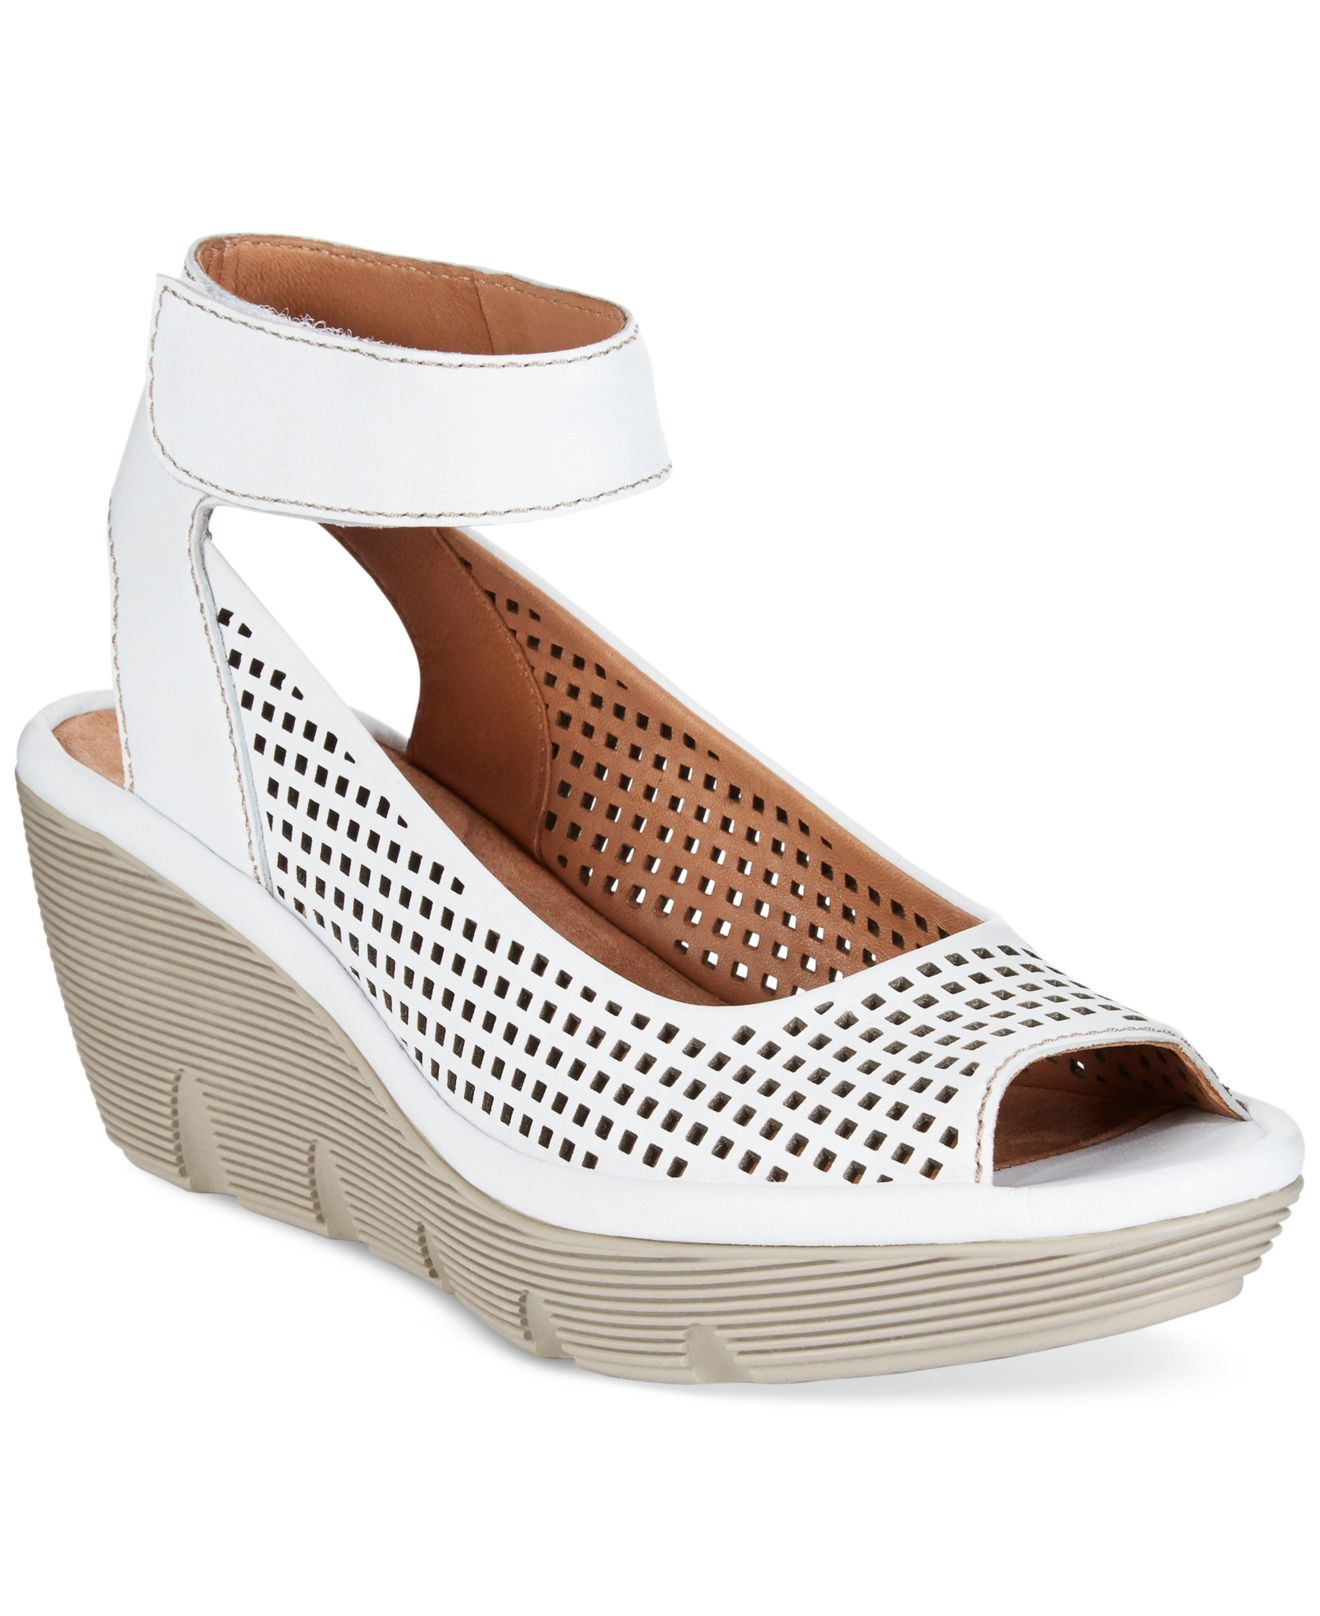 clarks white leather sandals